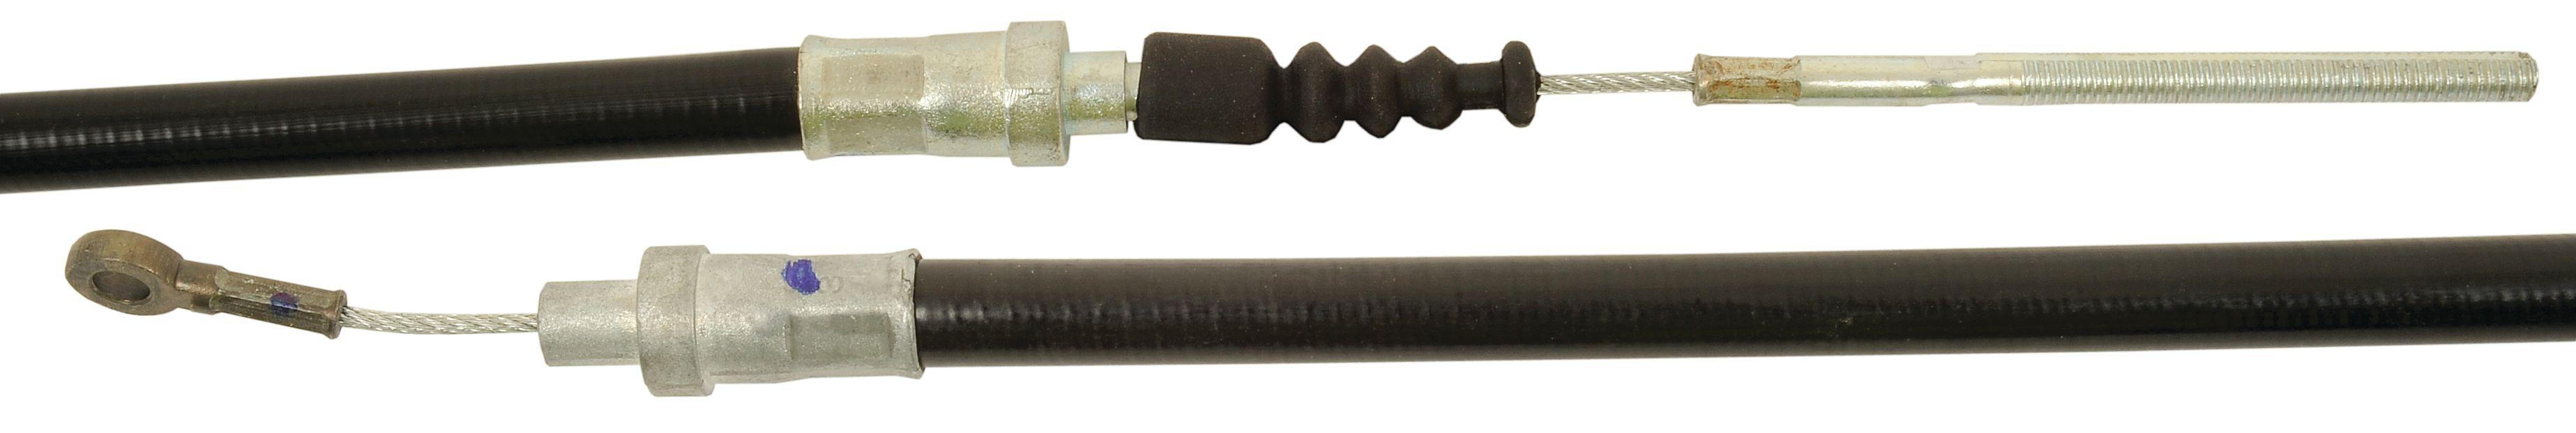 FIAT CABLE-HITCH PICK UP (1710MM) 43794